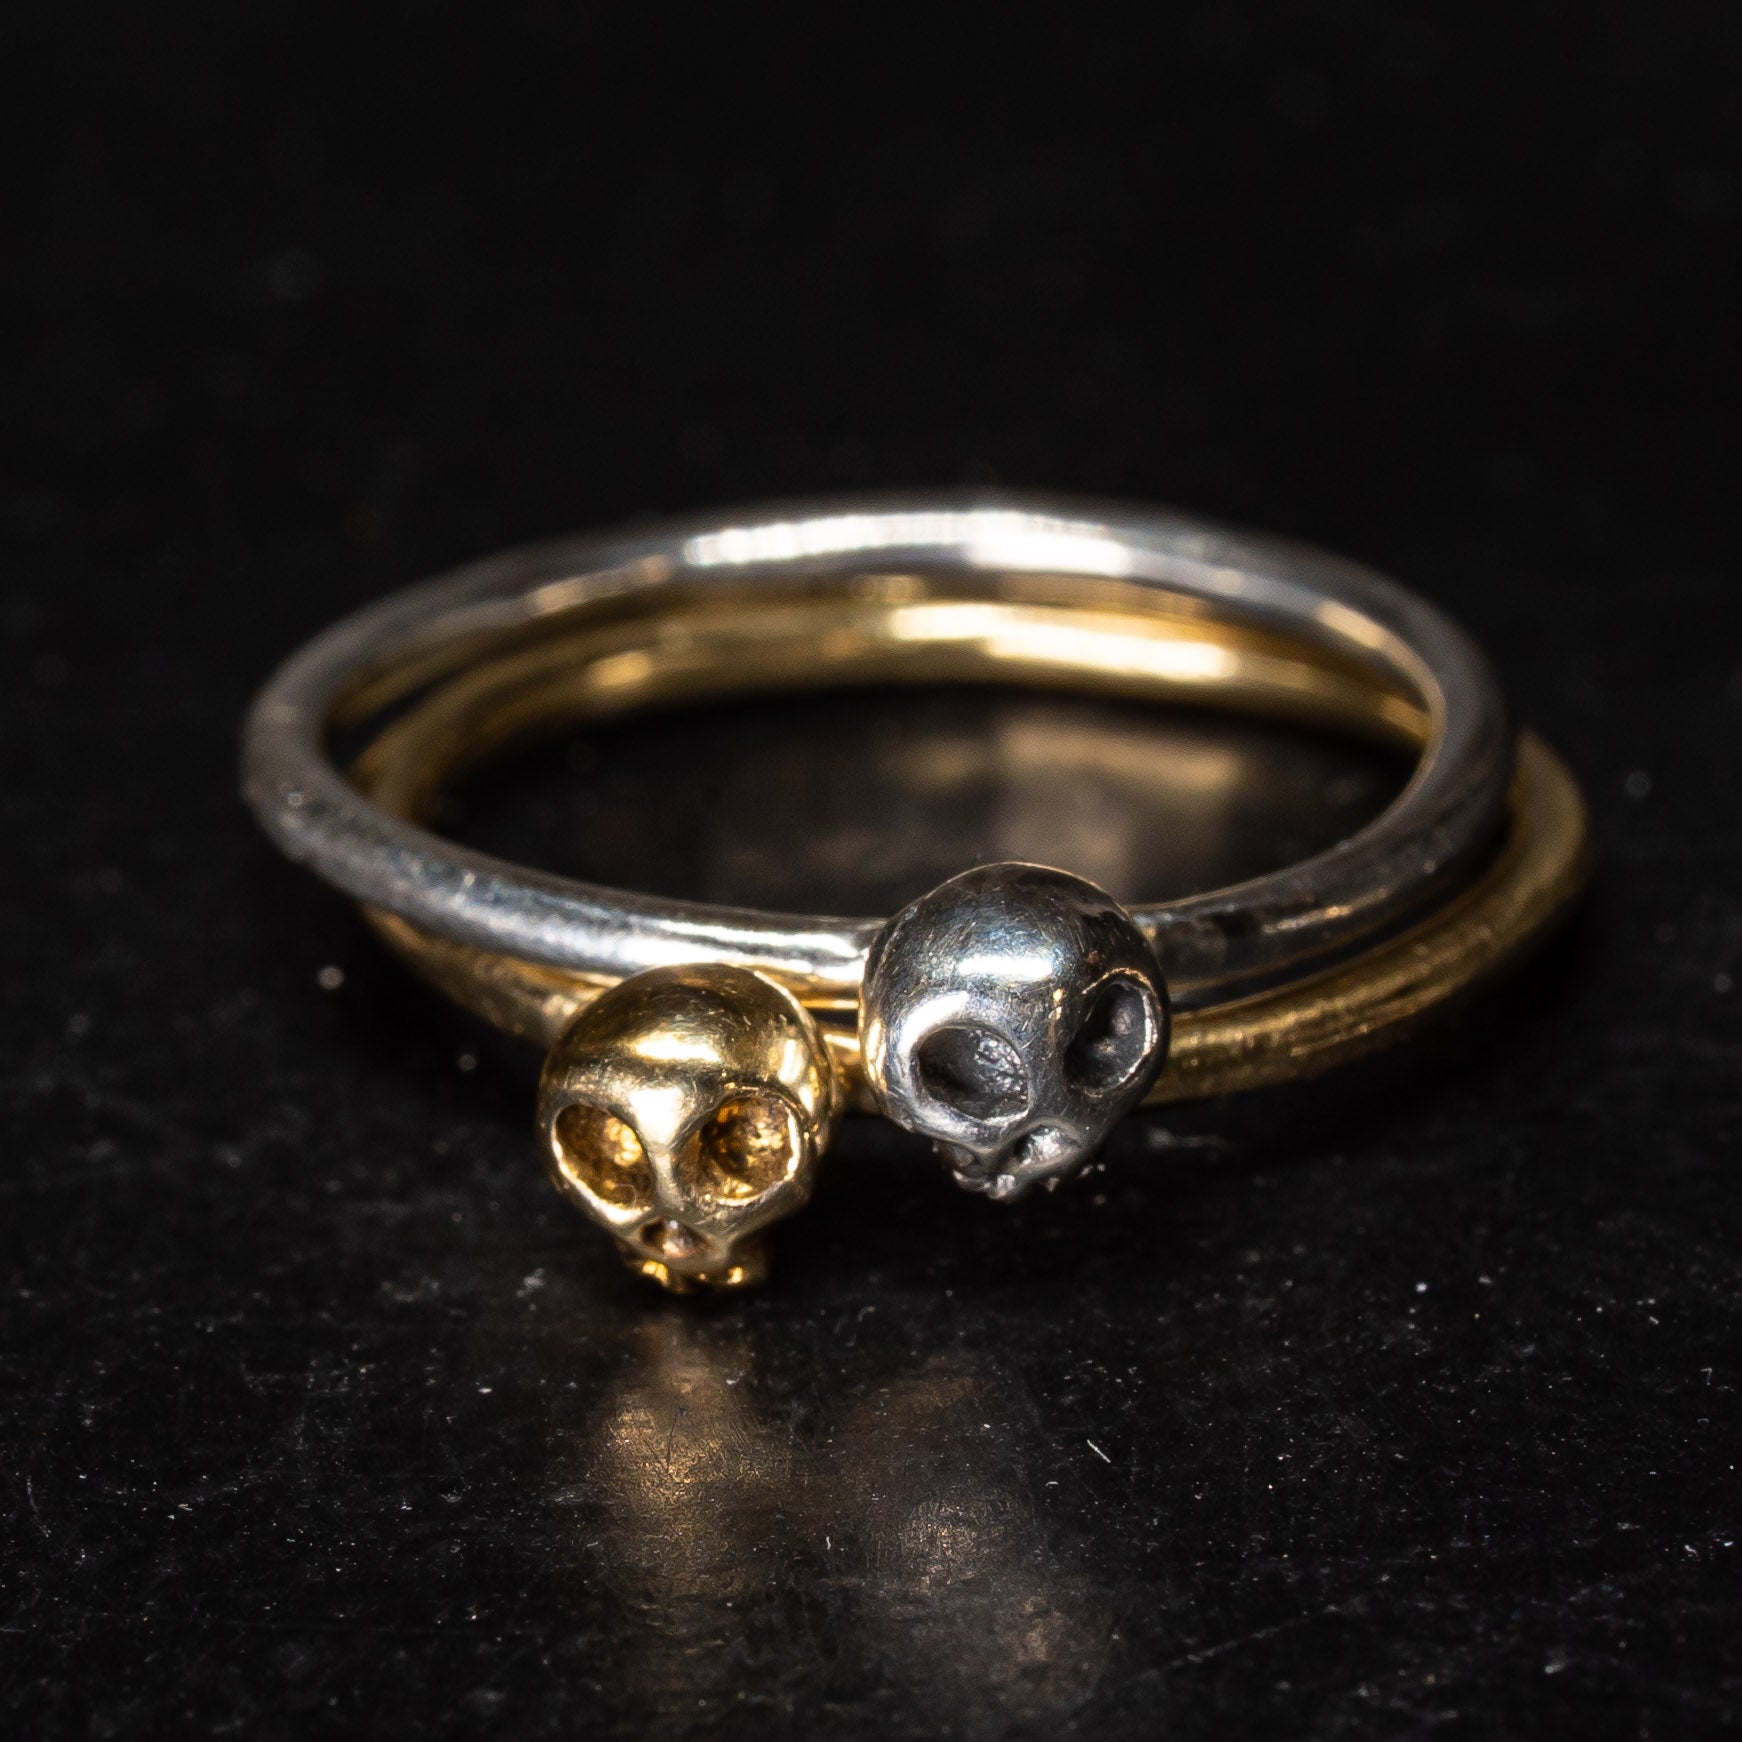 Gold and silver skull staking rings